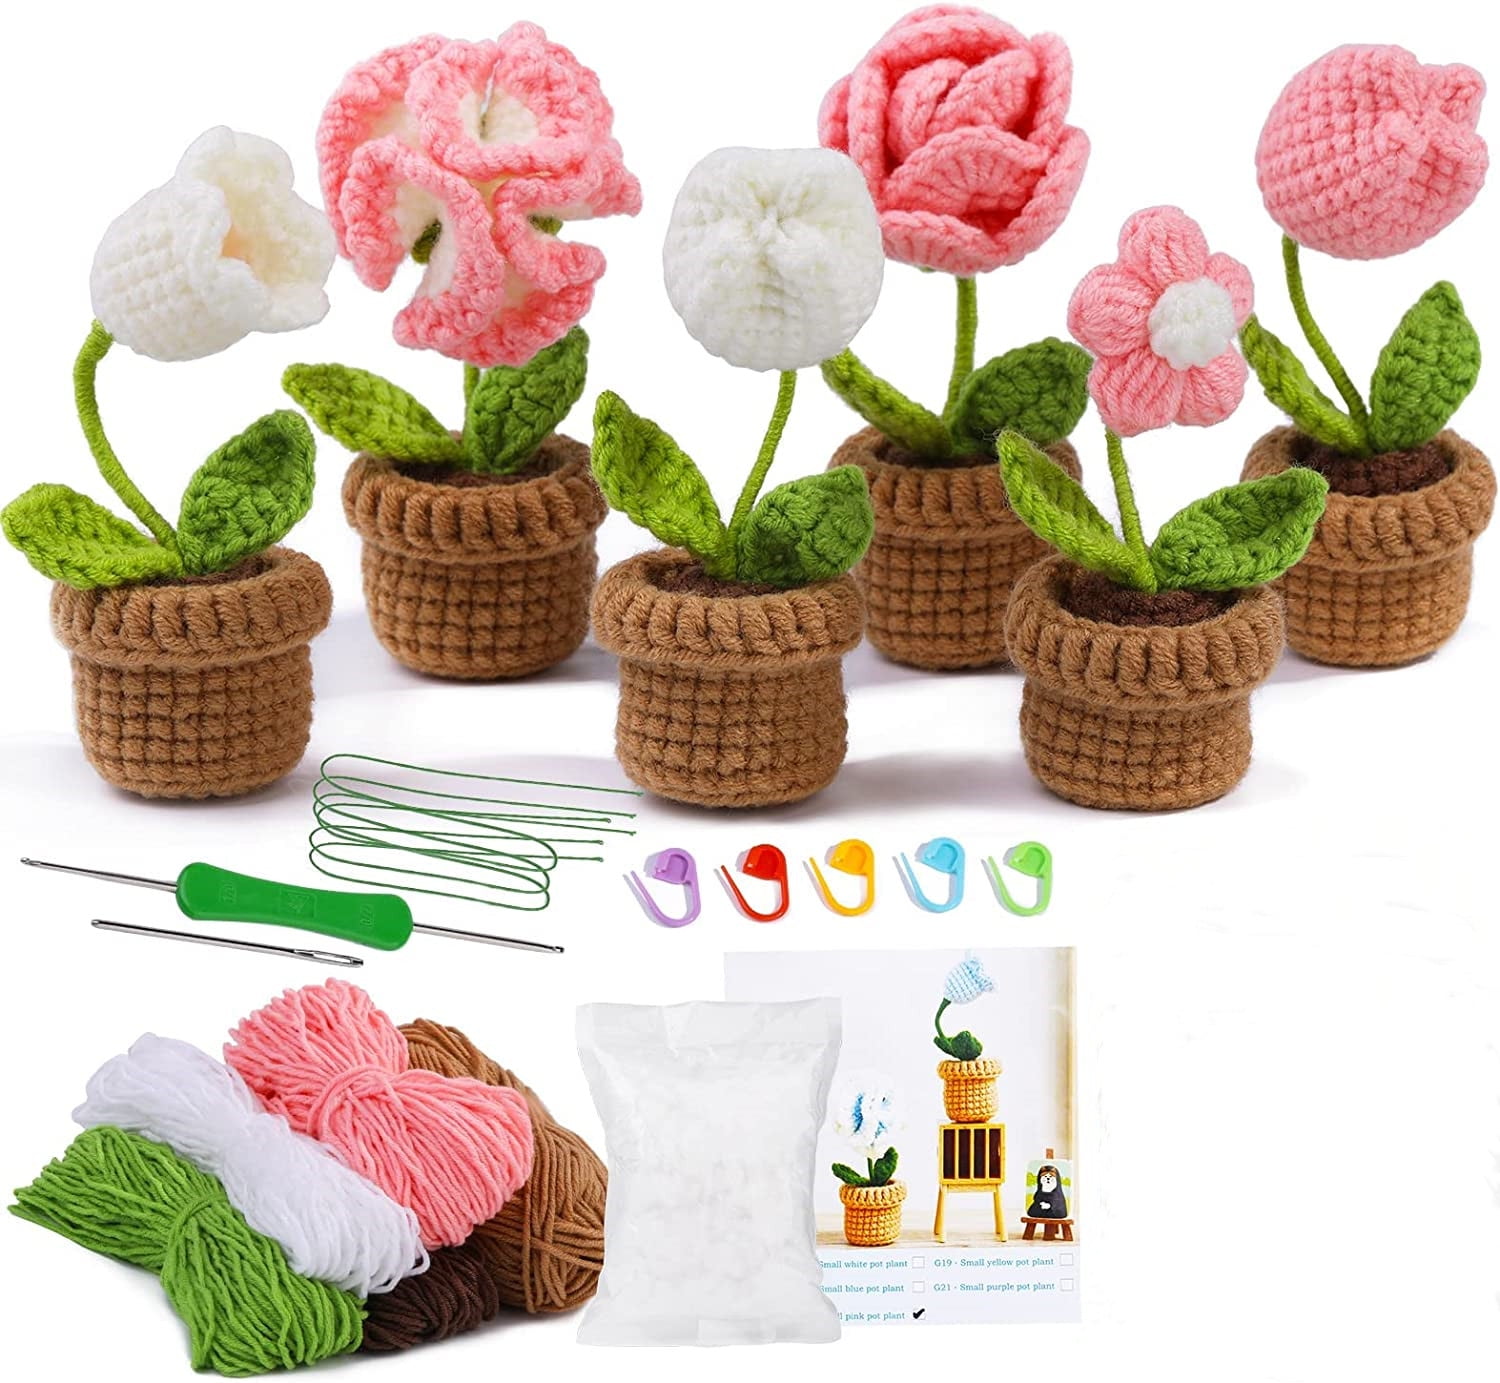  Qunland Crochet Kit for Beginners, 6 Pcs Potted Flowers DIY Kit  for Adults and Kids, Crochet Starter Knitting Kit for Complete Beginners  with Step-by-Step Instructions and Video Tutorials (Purple)